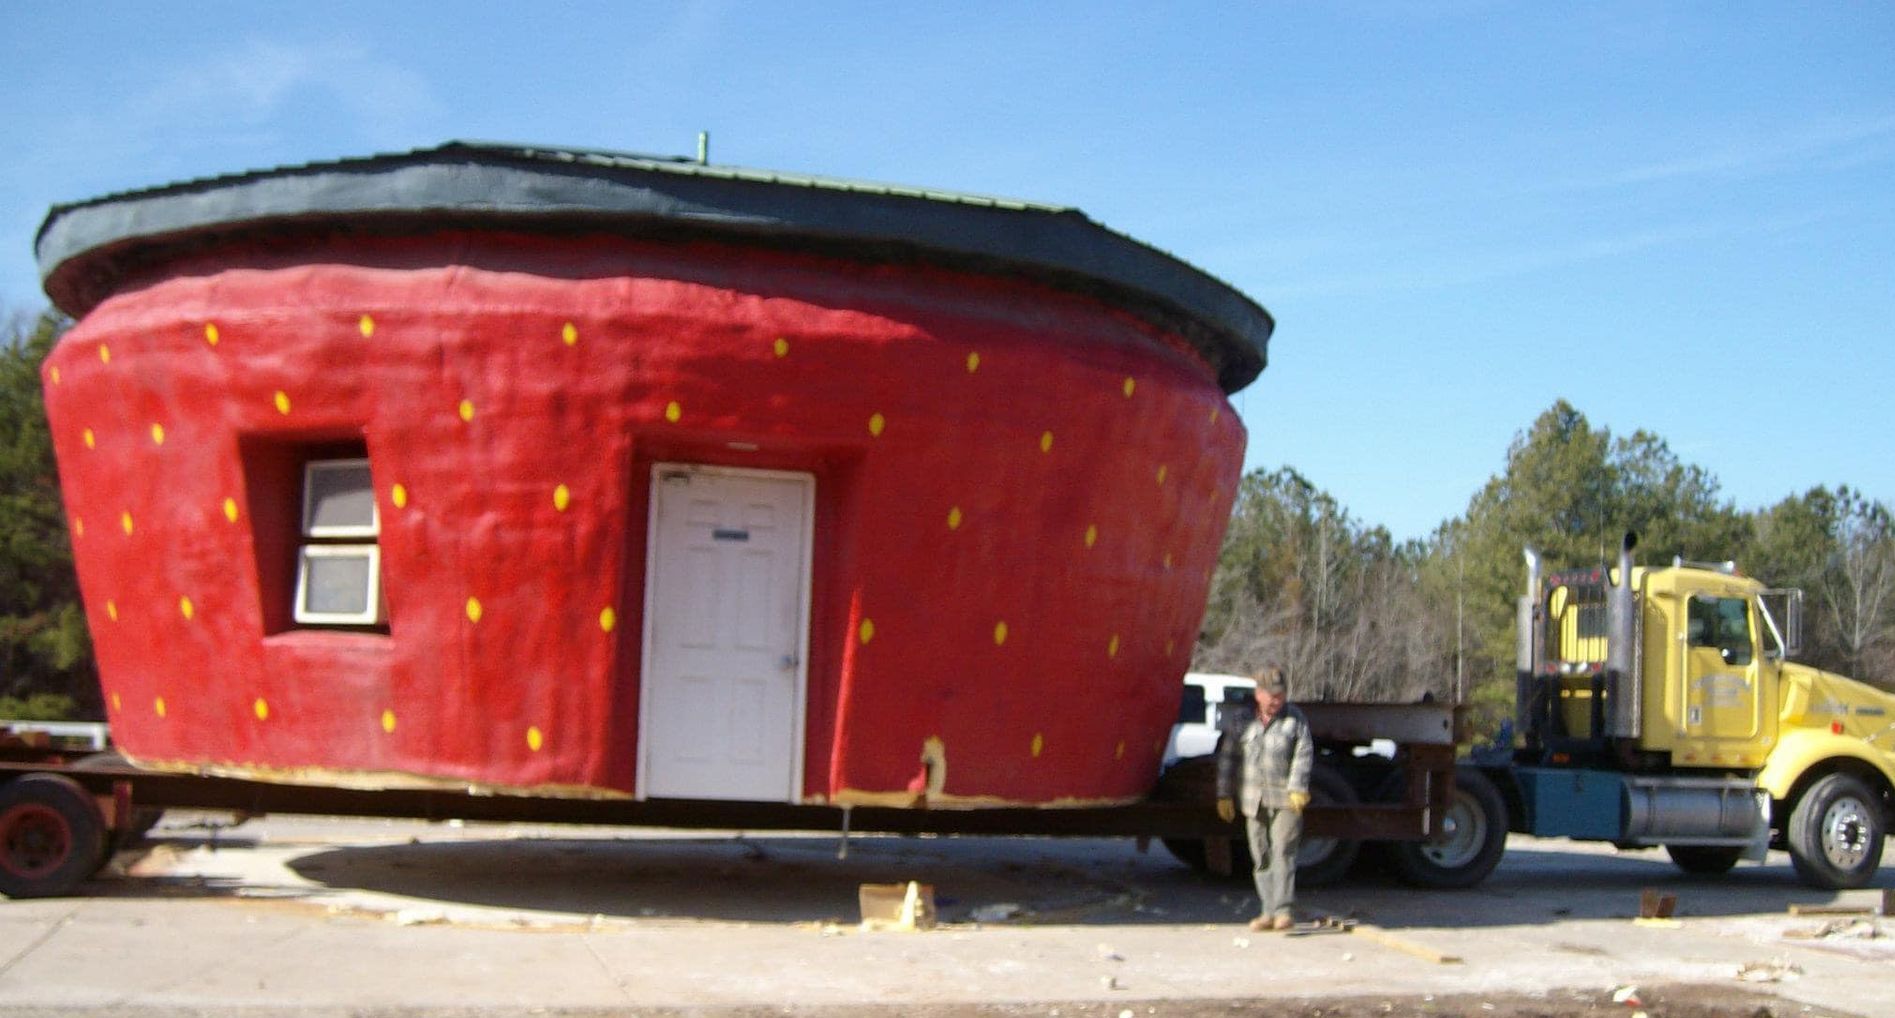 
World's Largest Strawberry-shaped Building, world record in Ellerbe, North Carolina